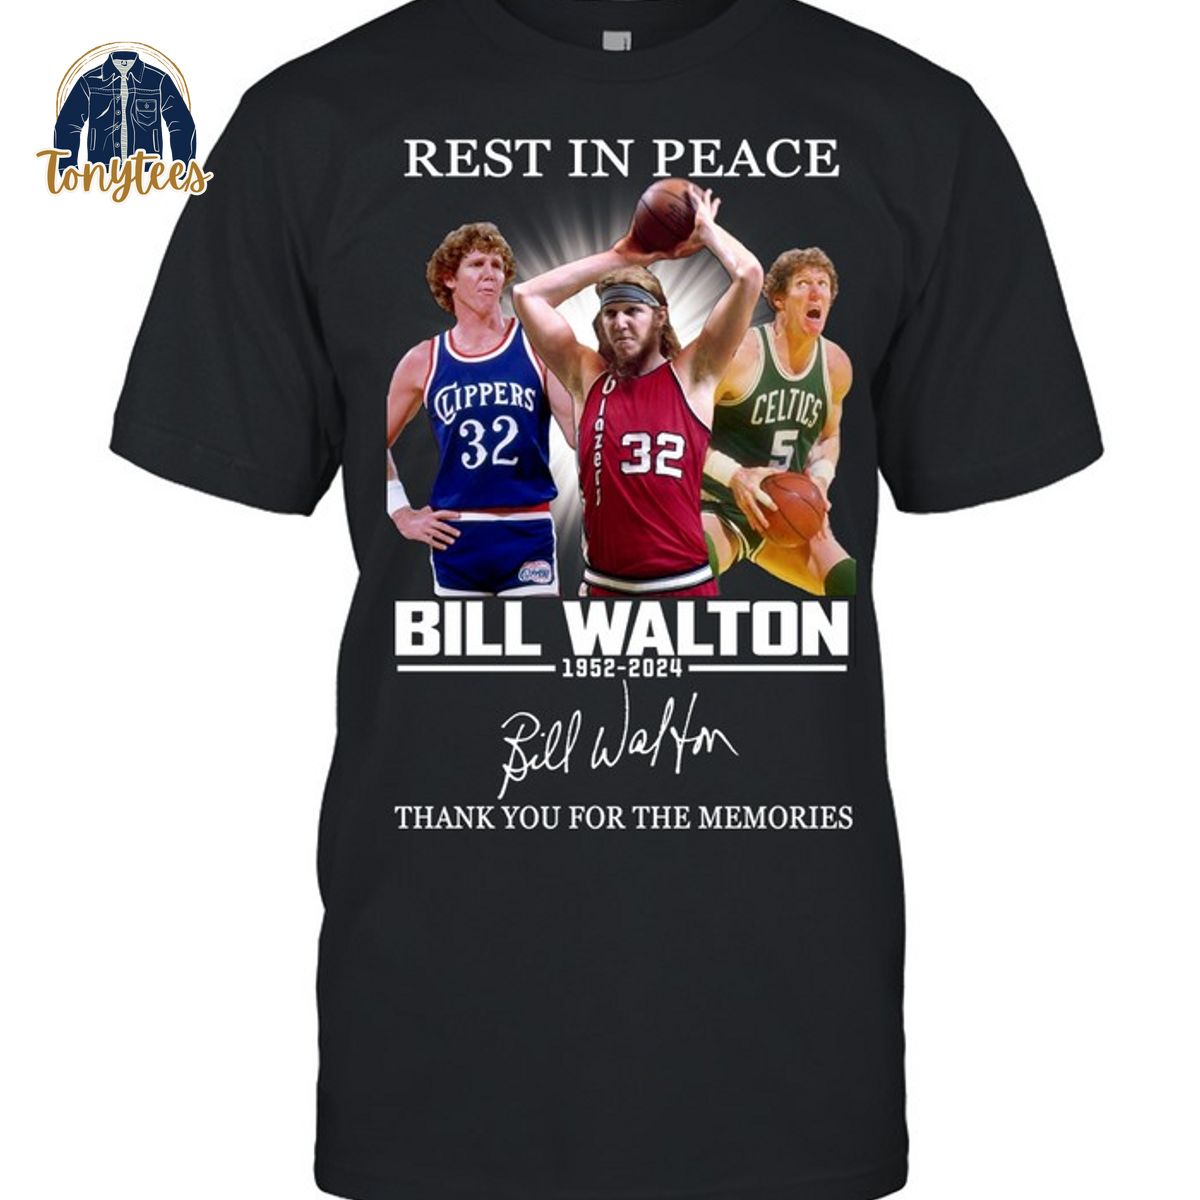 Bill Walton Rest in peace thank you for the memories shirt